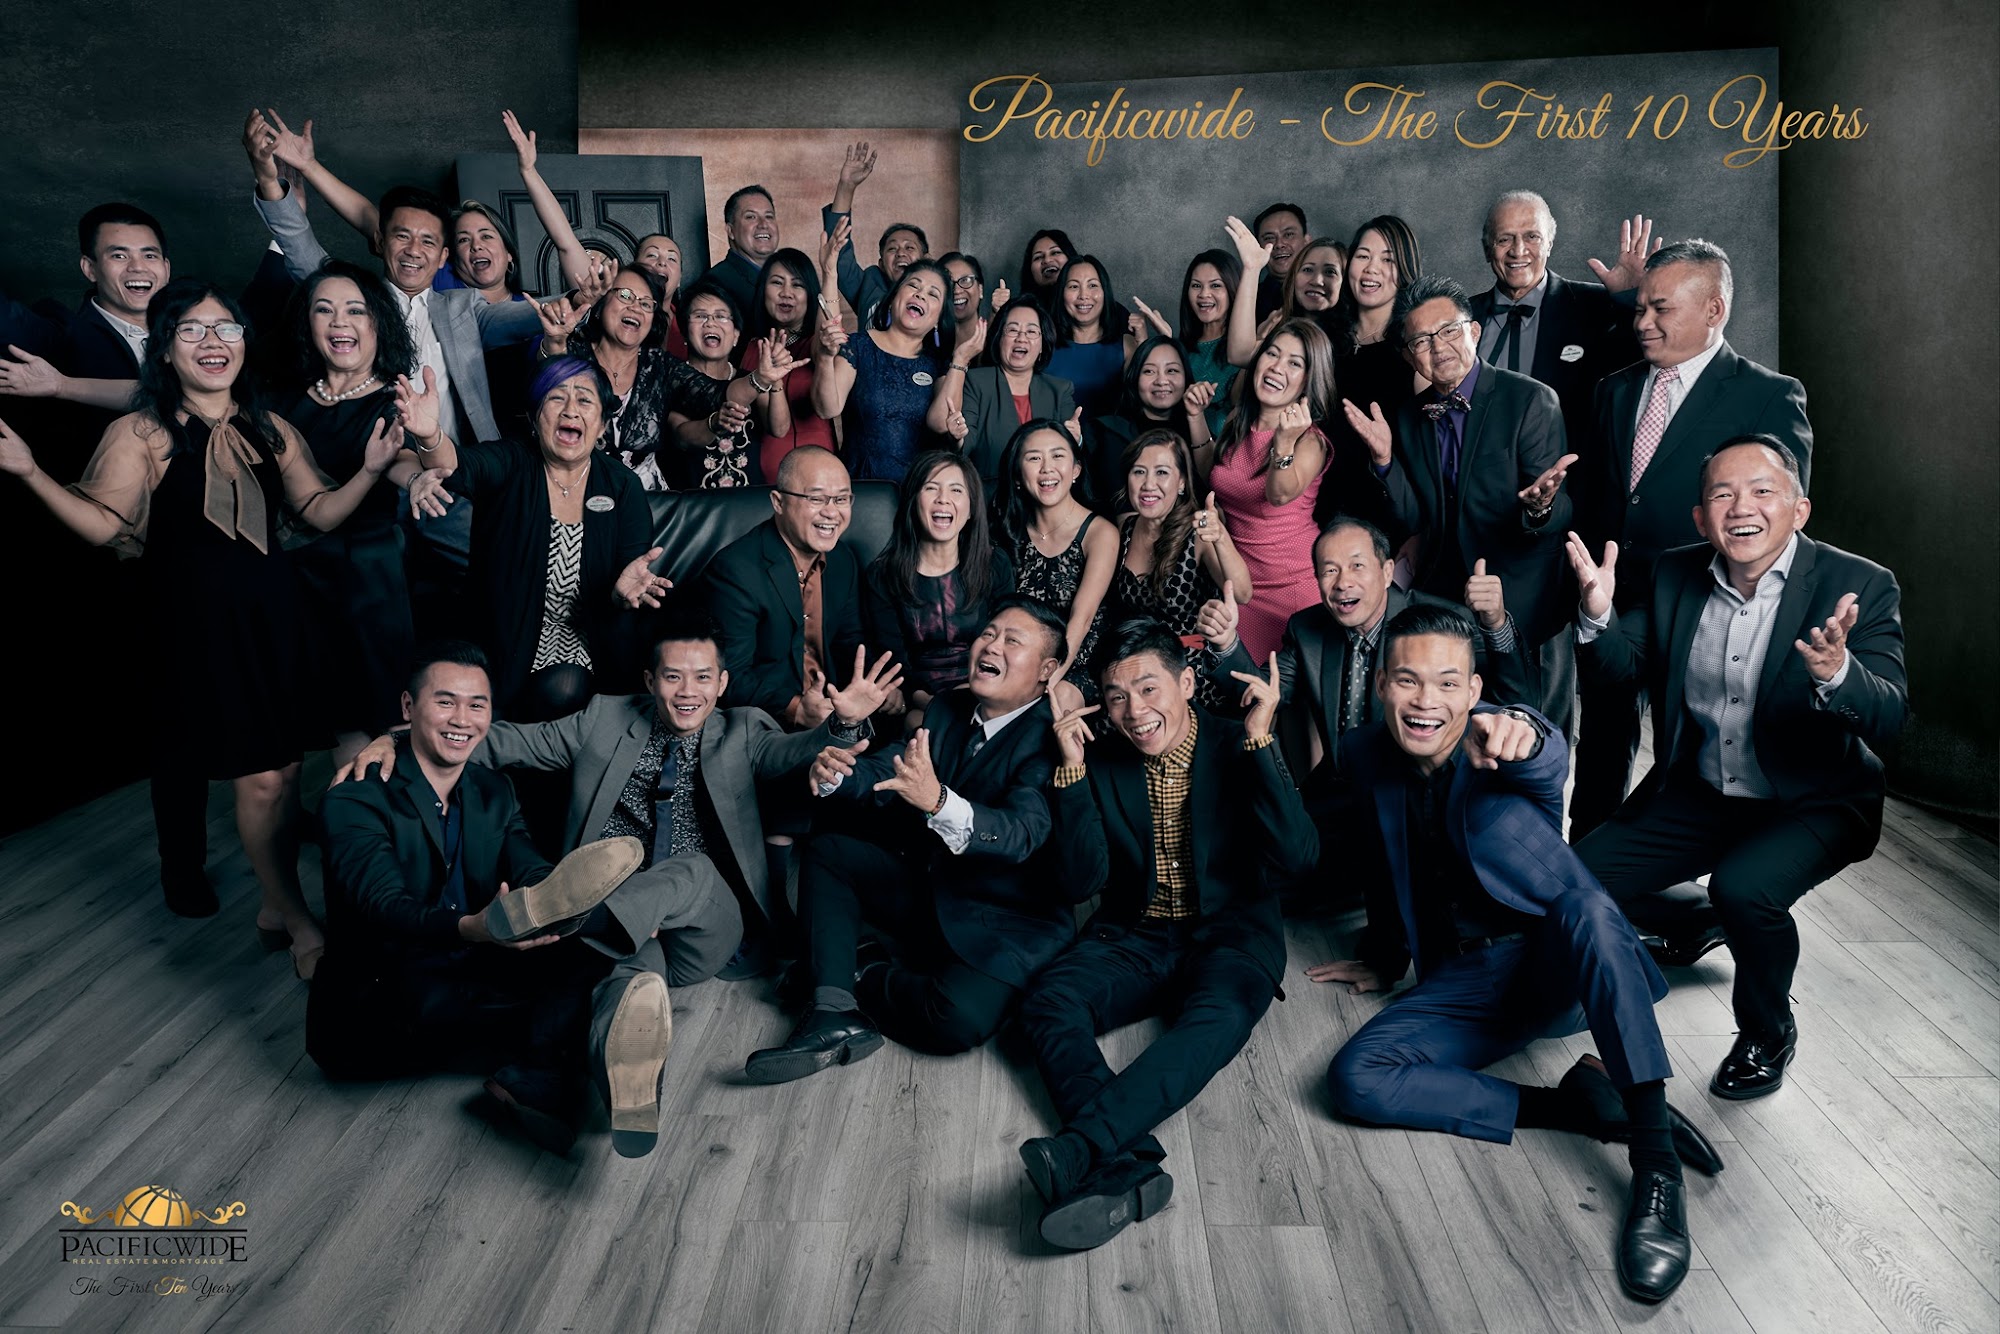 PACIFICWIDE BUSINESS GROUP INC.